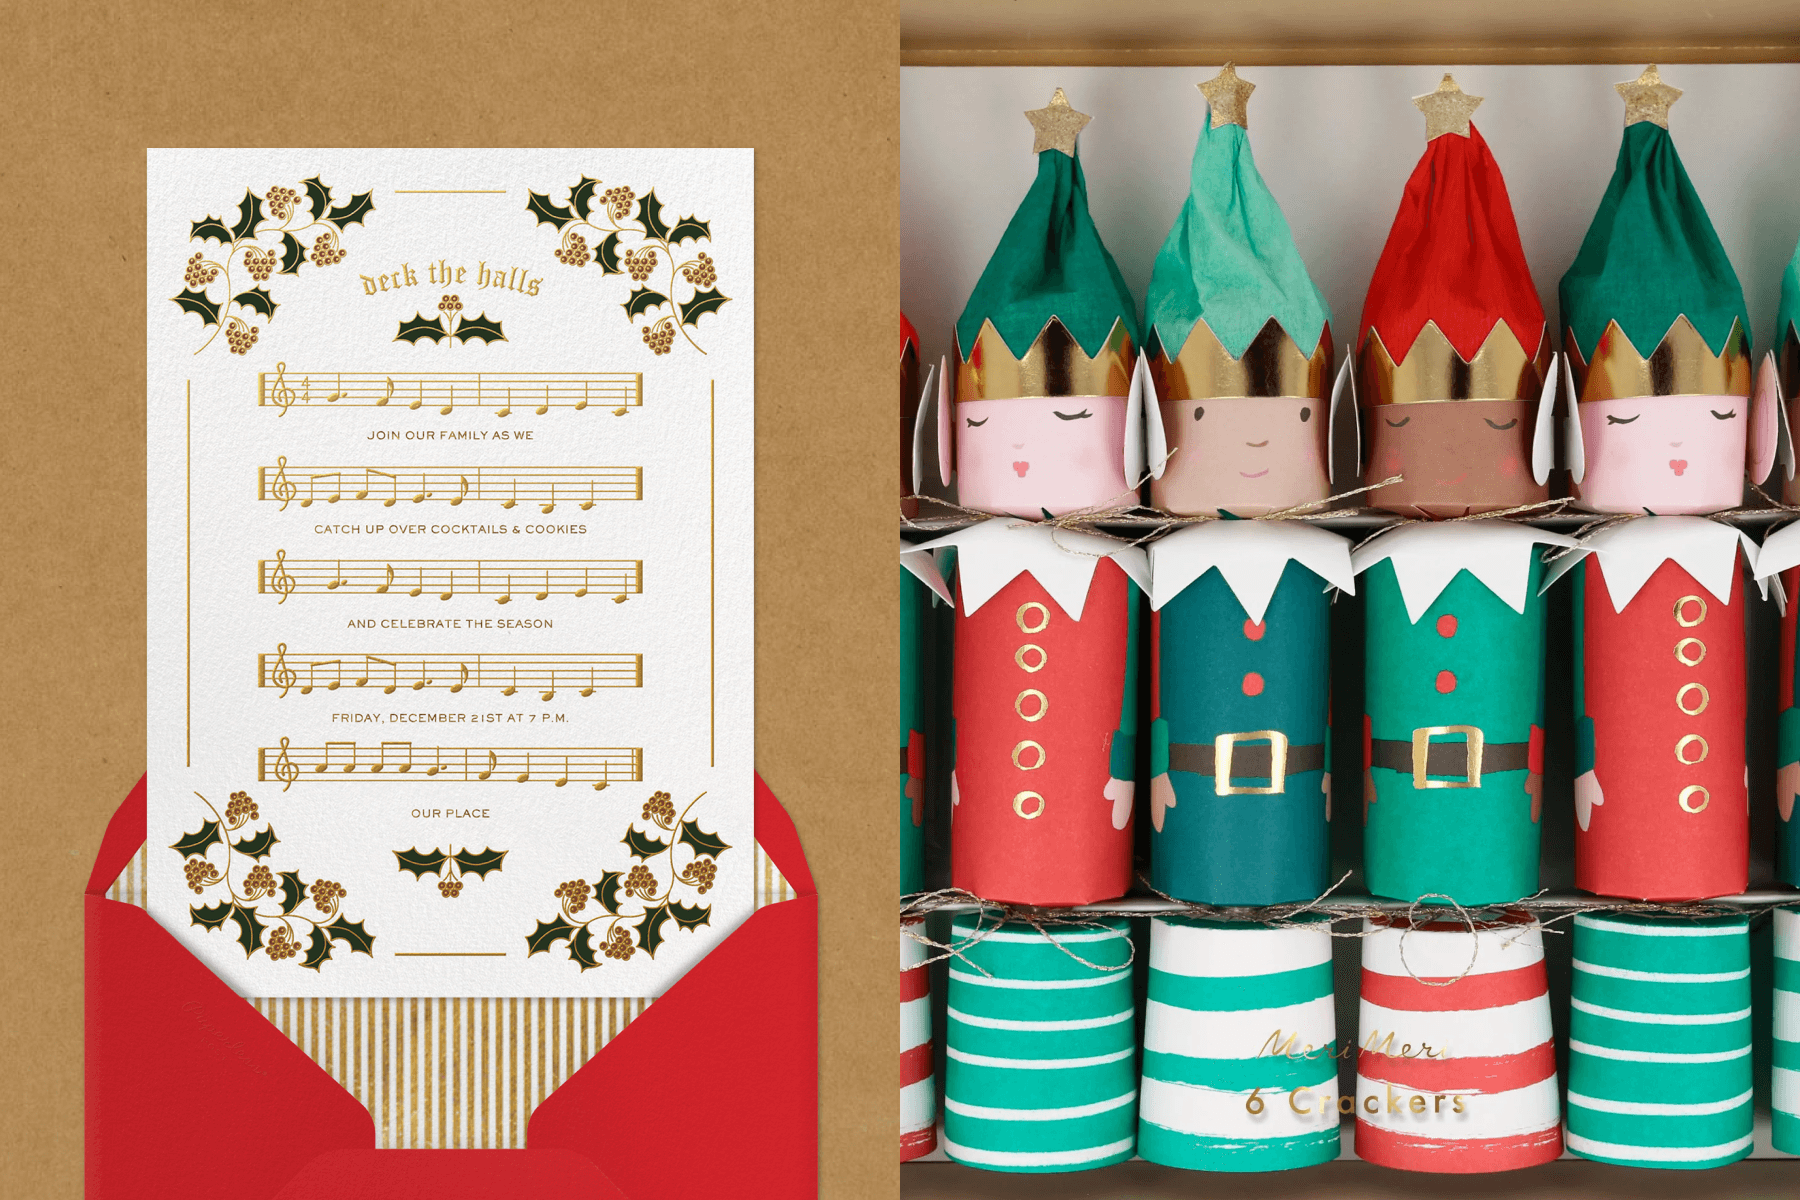 An invitation that resembles sheet music with holly flourishes in the corners; four party crackers that look like Christmas elves.